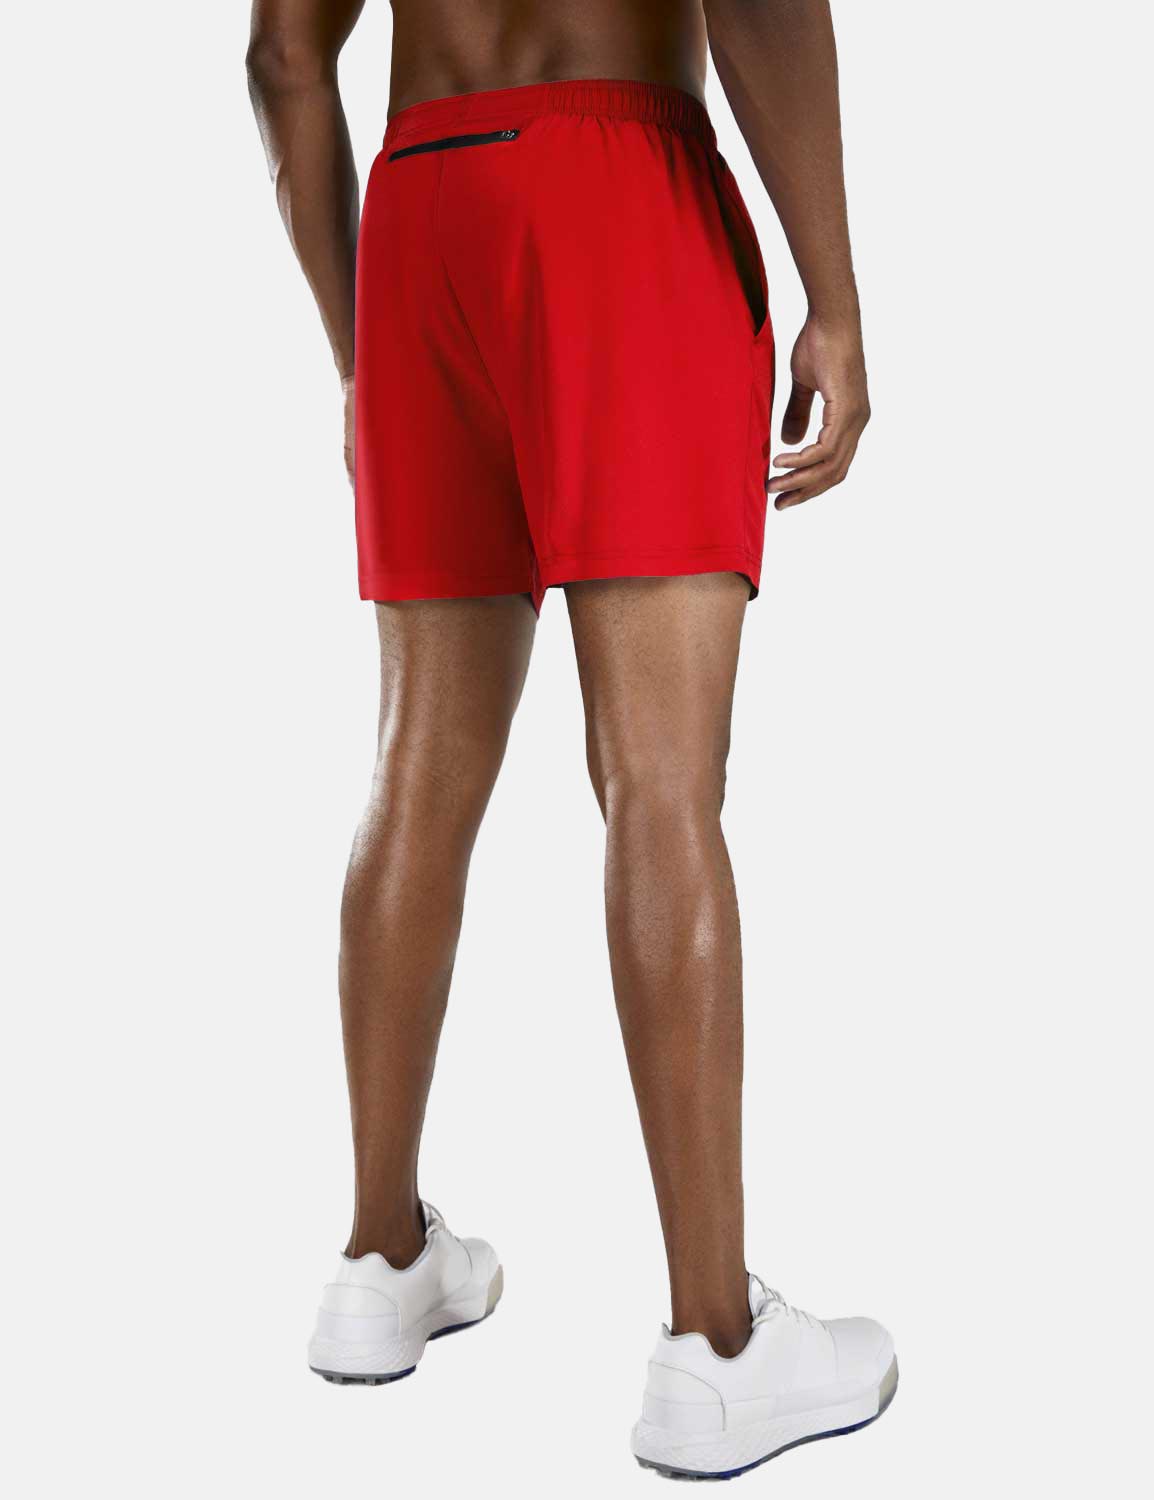 Baleaf Men's 5'' Light-WeightBaleaf Men's 5'' Light-Weight Quick Dry Fully Lined Shorts abd215 Red Back